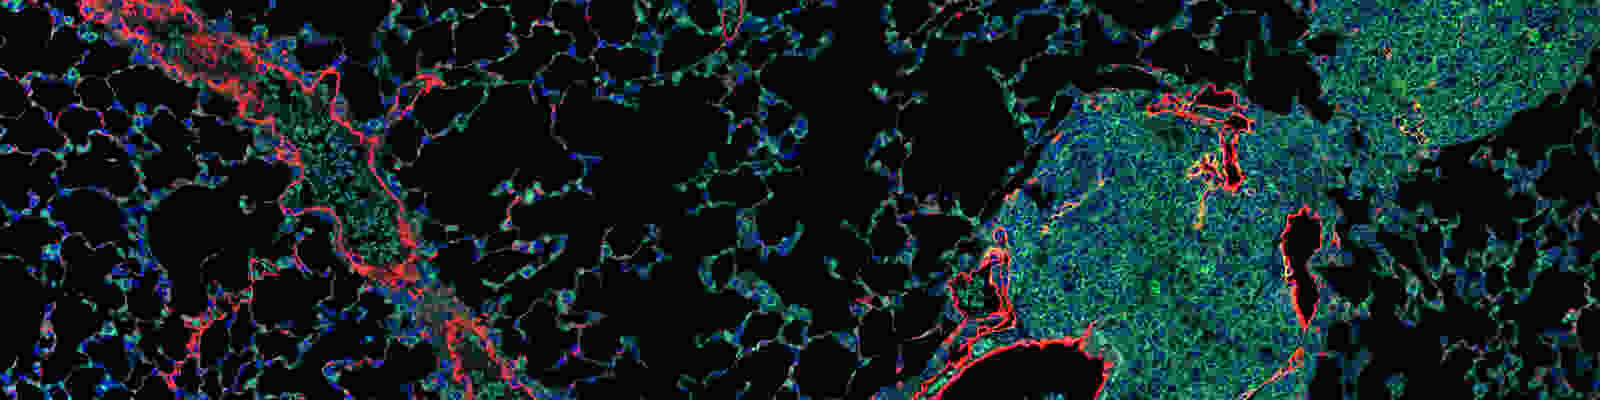 tertiary lymphoid organ in a mouse lung stained with LYVE-1 in red, STING in green, and DAPI for nuclei in blue